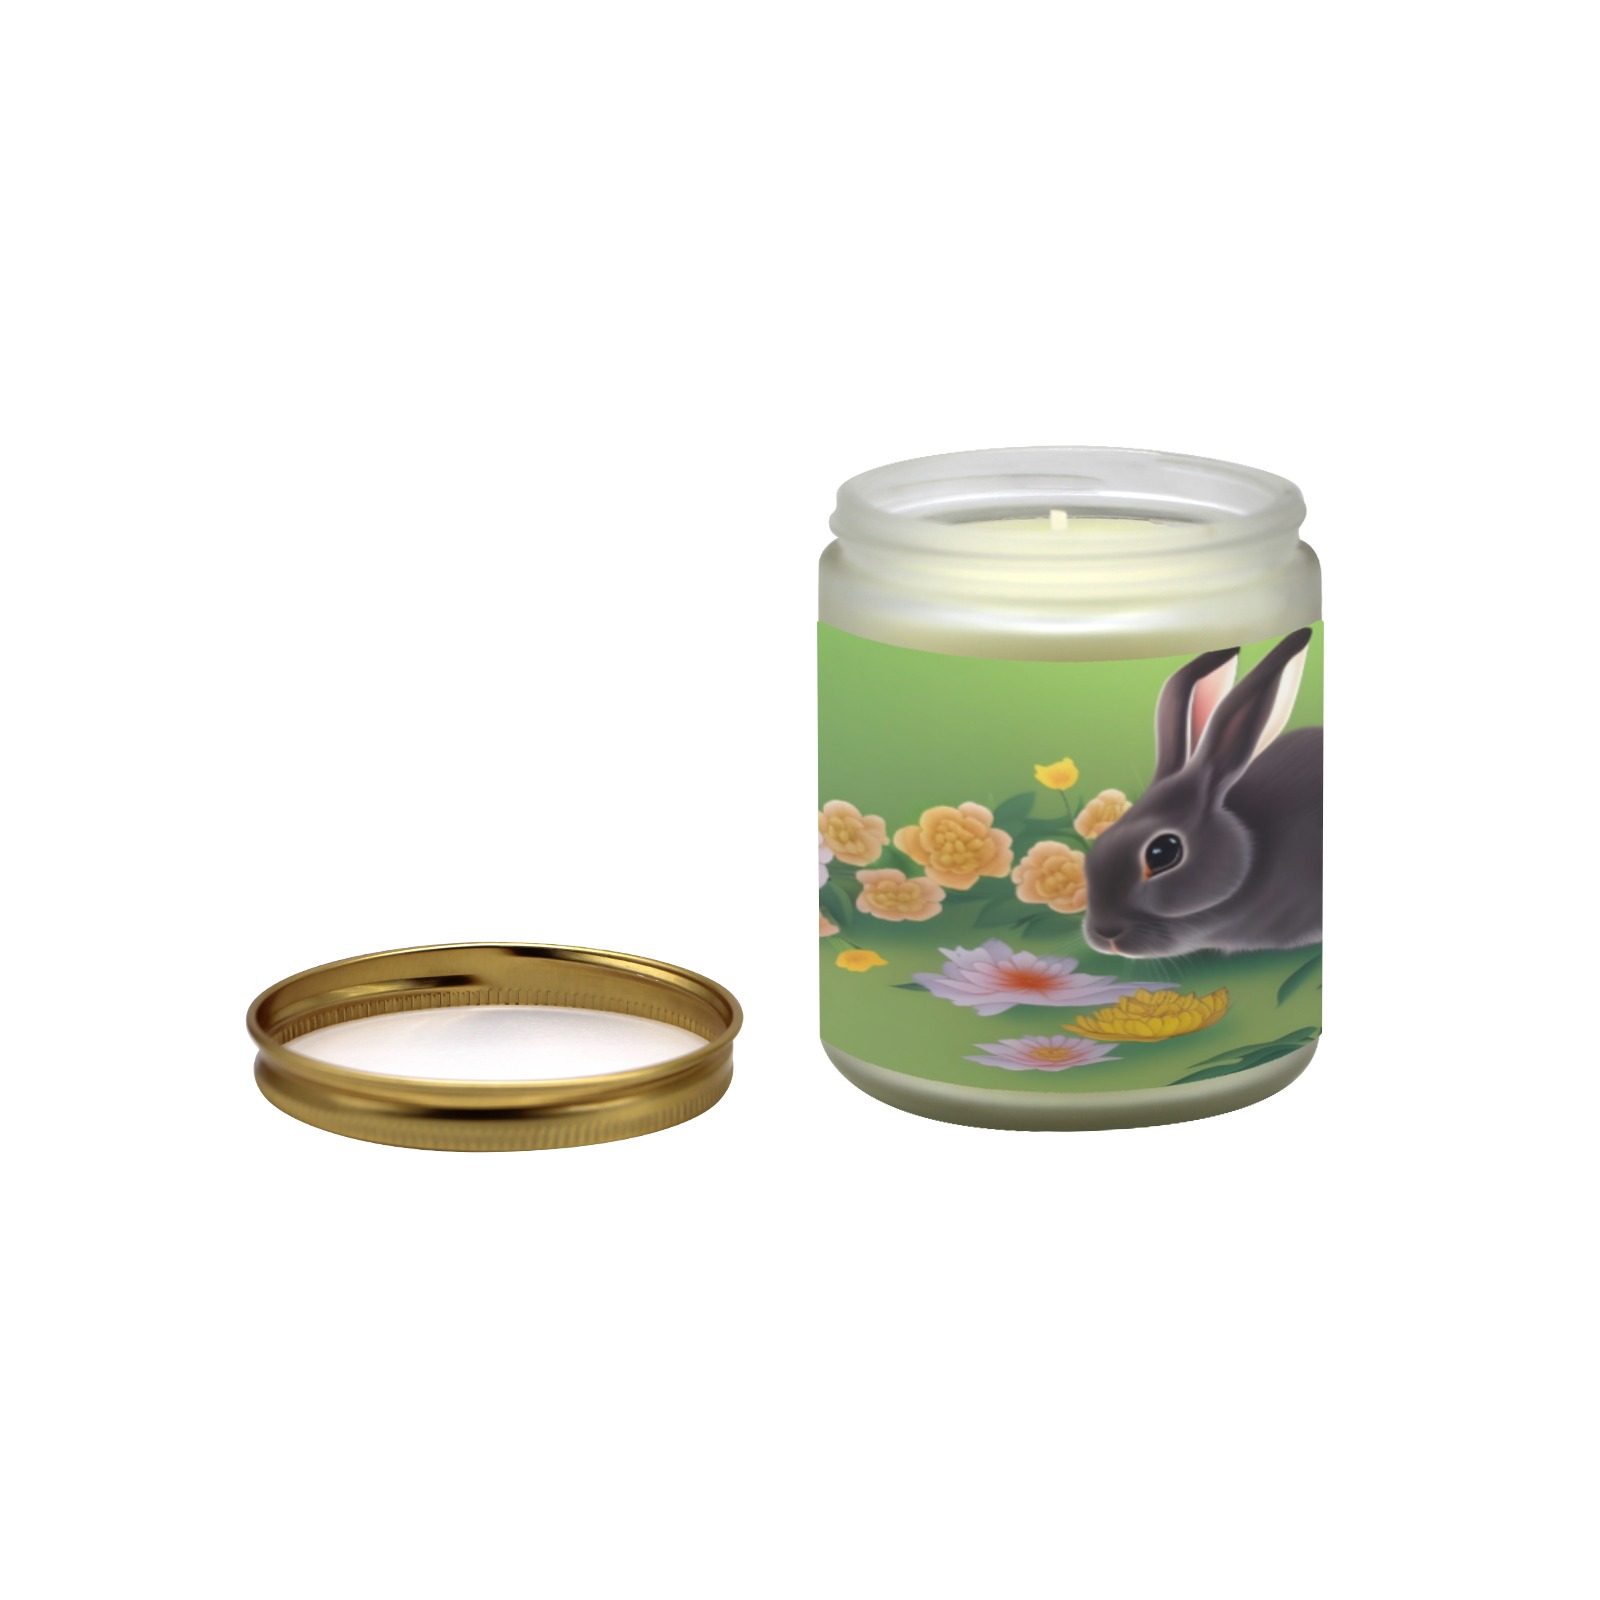 Rabbit and Flowers Frosted Glass Candle Cup - Large Size (Lavender&Lemon)